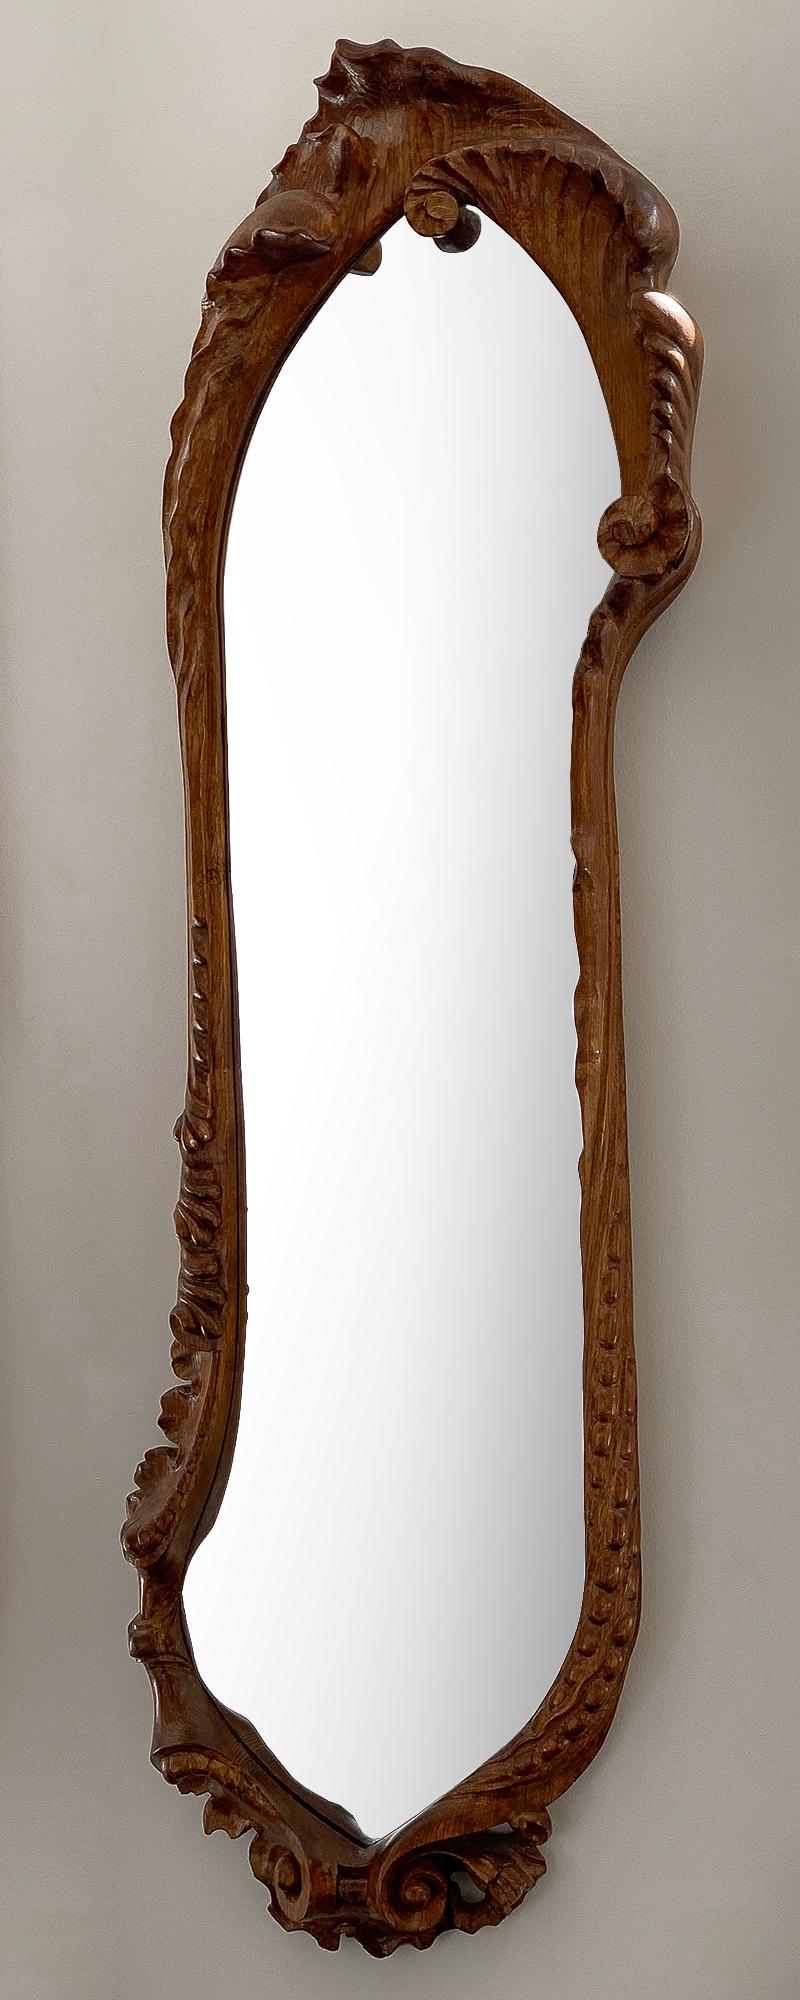 Antoni Gaudí Calvet wall mirror in oak. Designed by Gaudí in 1902 for the Casa Calvet and reissued by BD Furntiure, Barcelona. Carved solid oak with varnished finish. The Art Nouveau style ornately carved asymmetrical wall mirror features a